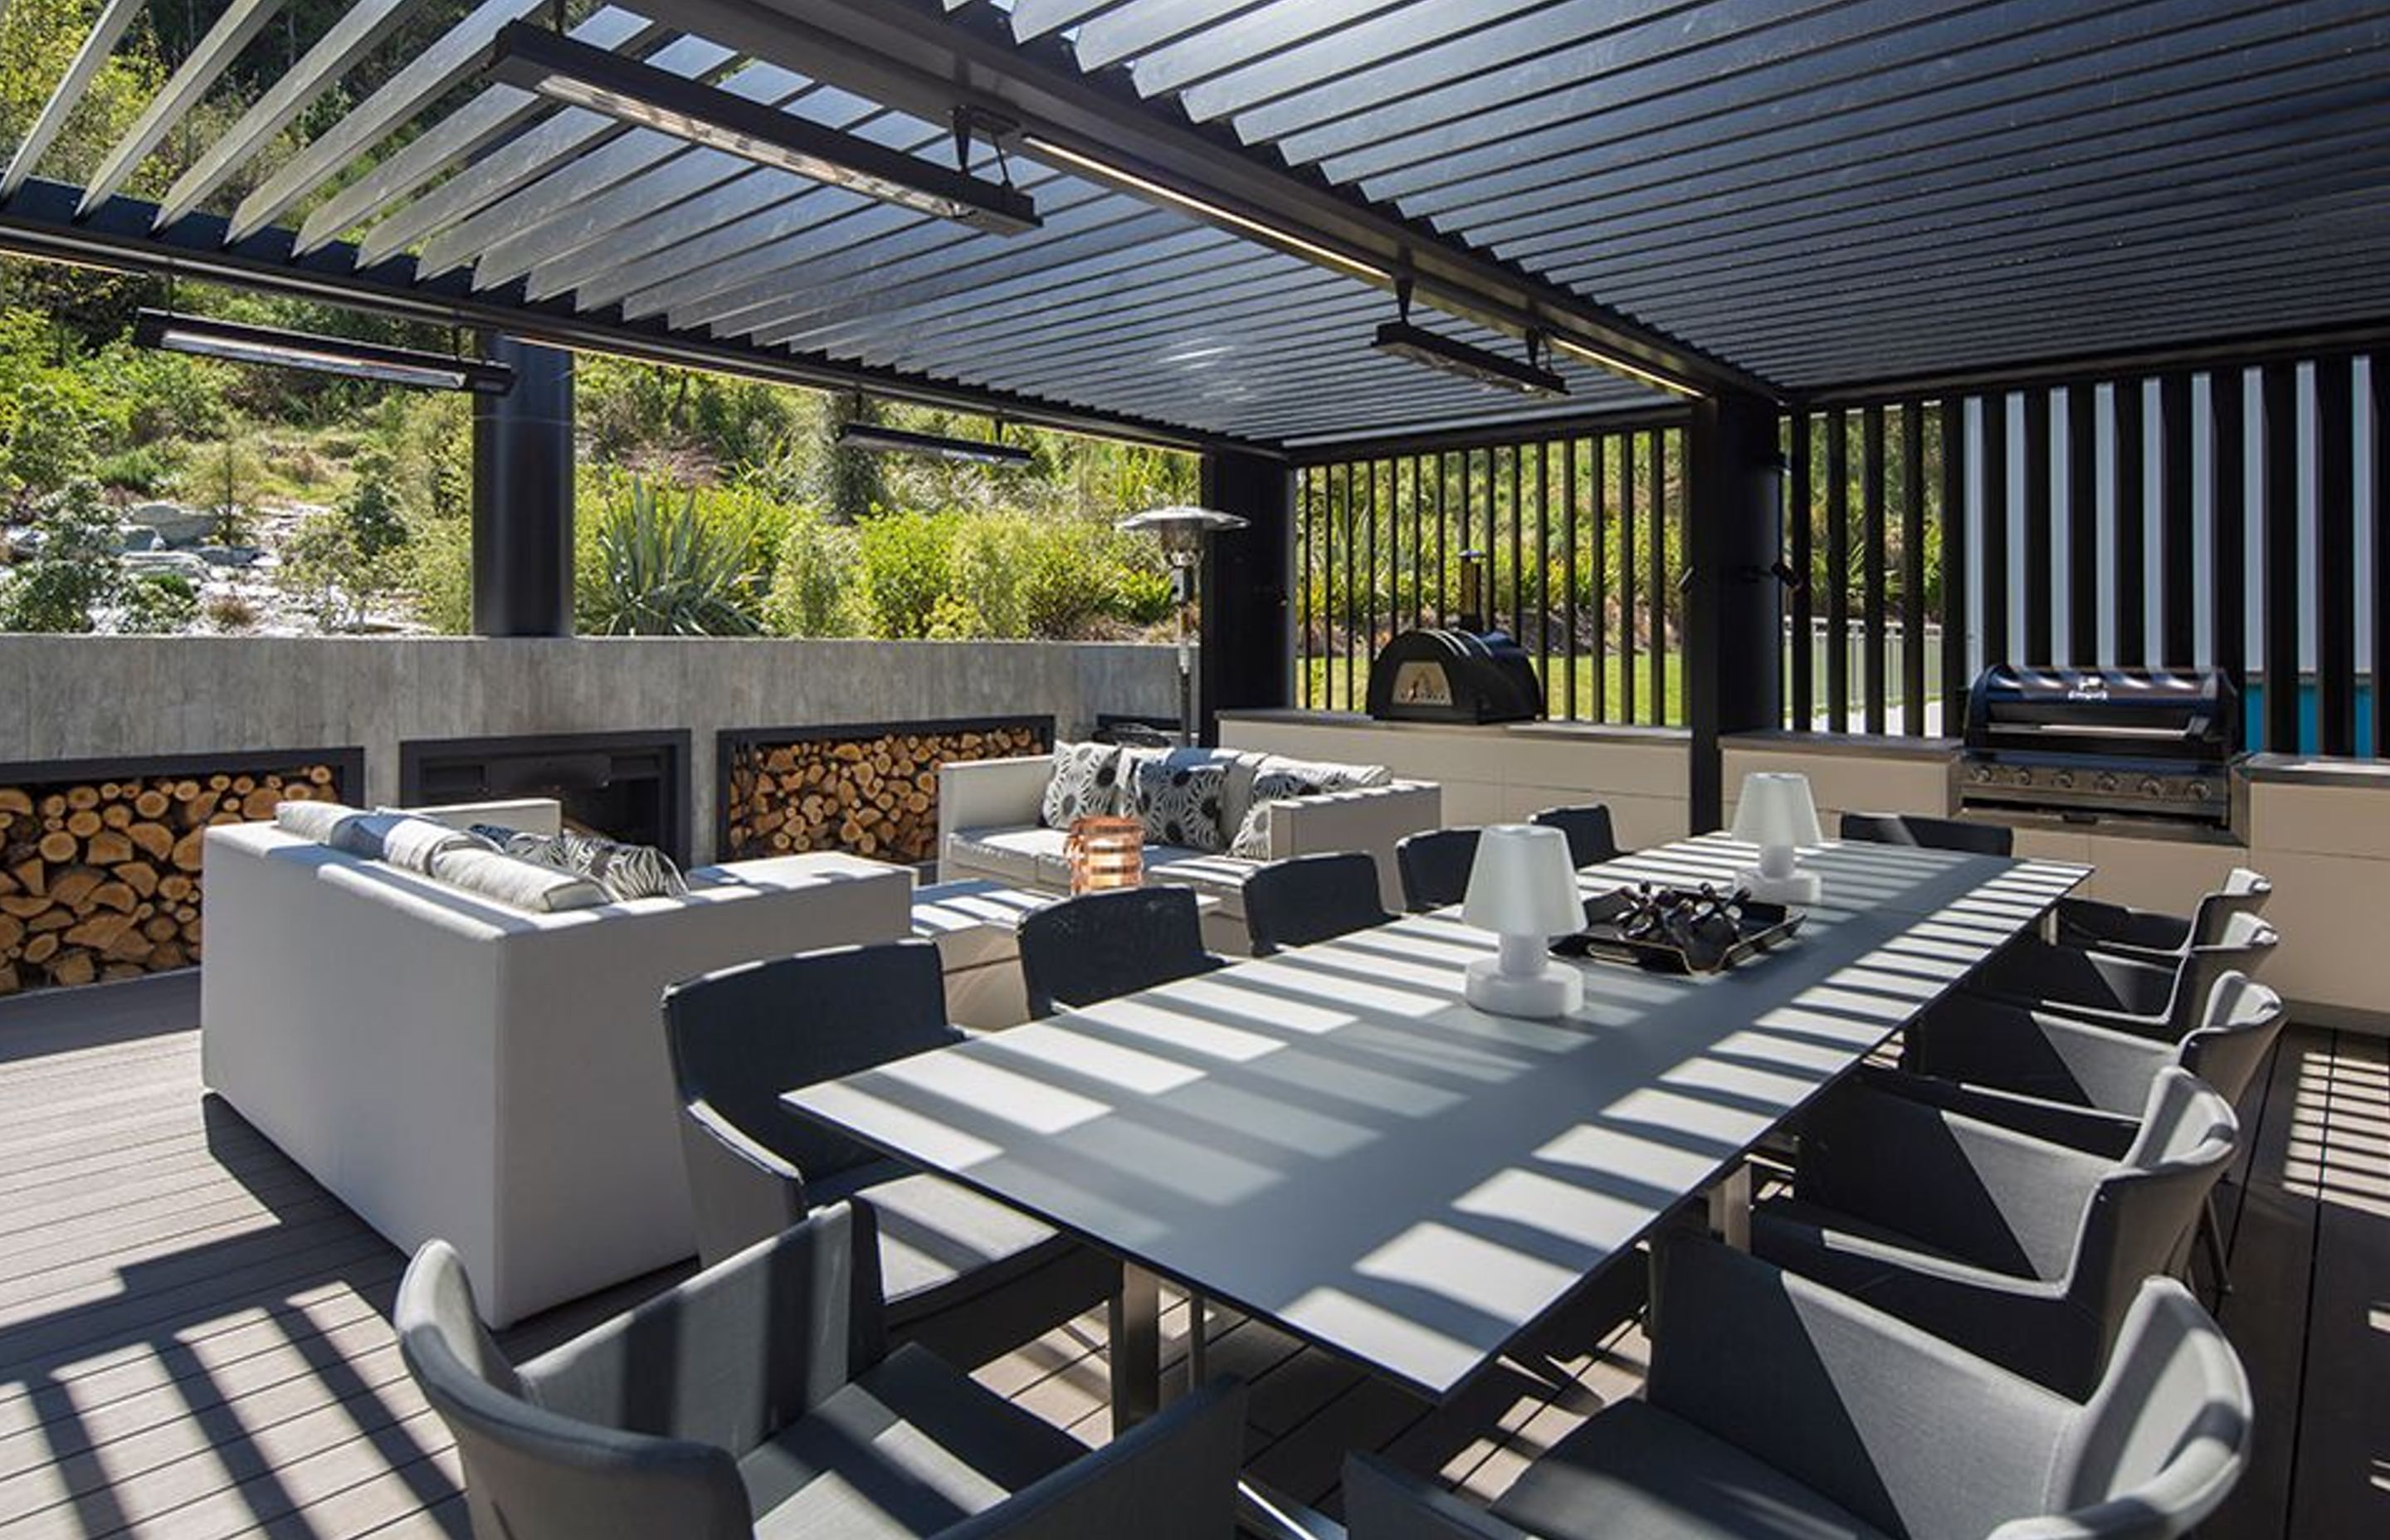 A built-in outdoor fireplace heats up the lounge area, while the pizza oven and barbecue provides the feast. The outdoor kitchen is an extension of the indoor kitchen to the right.